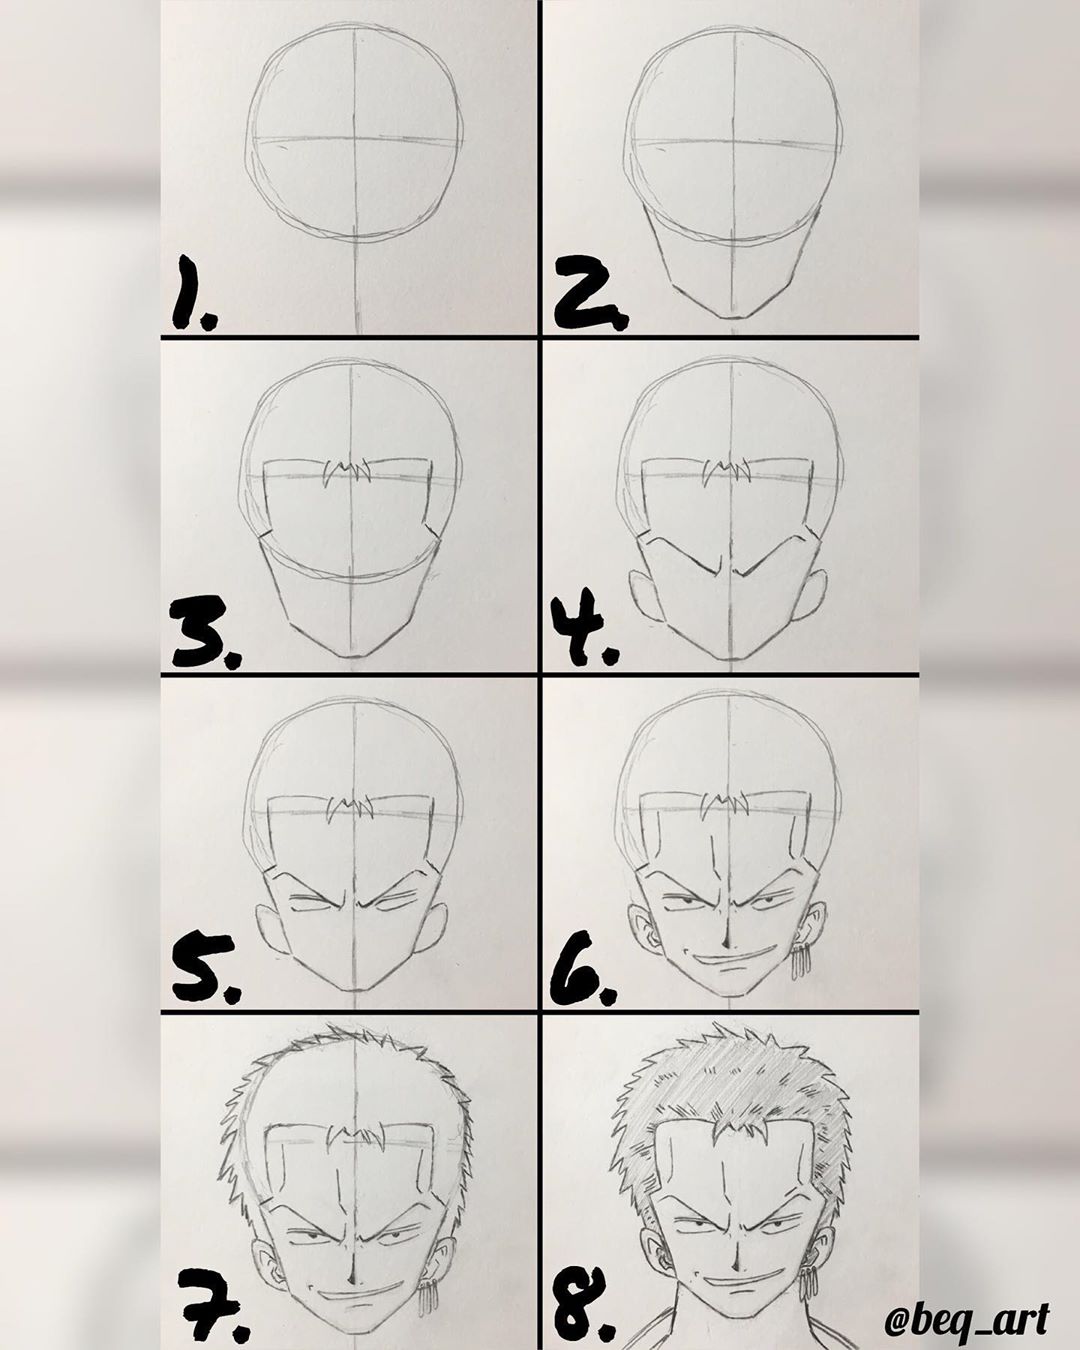 10 Anime Drawing Tutorials for Beginners Step by Step - Do It Before Me